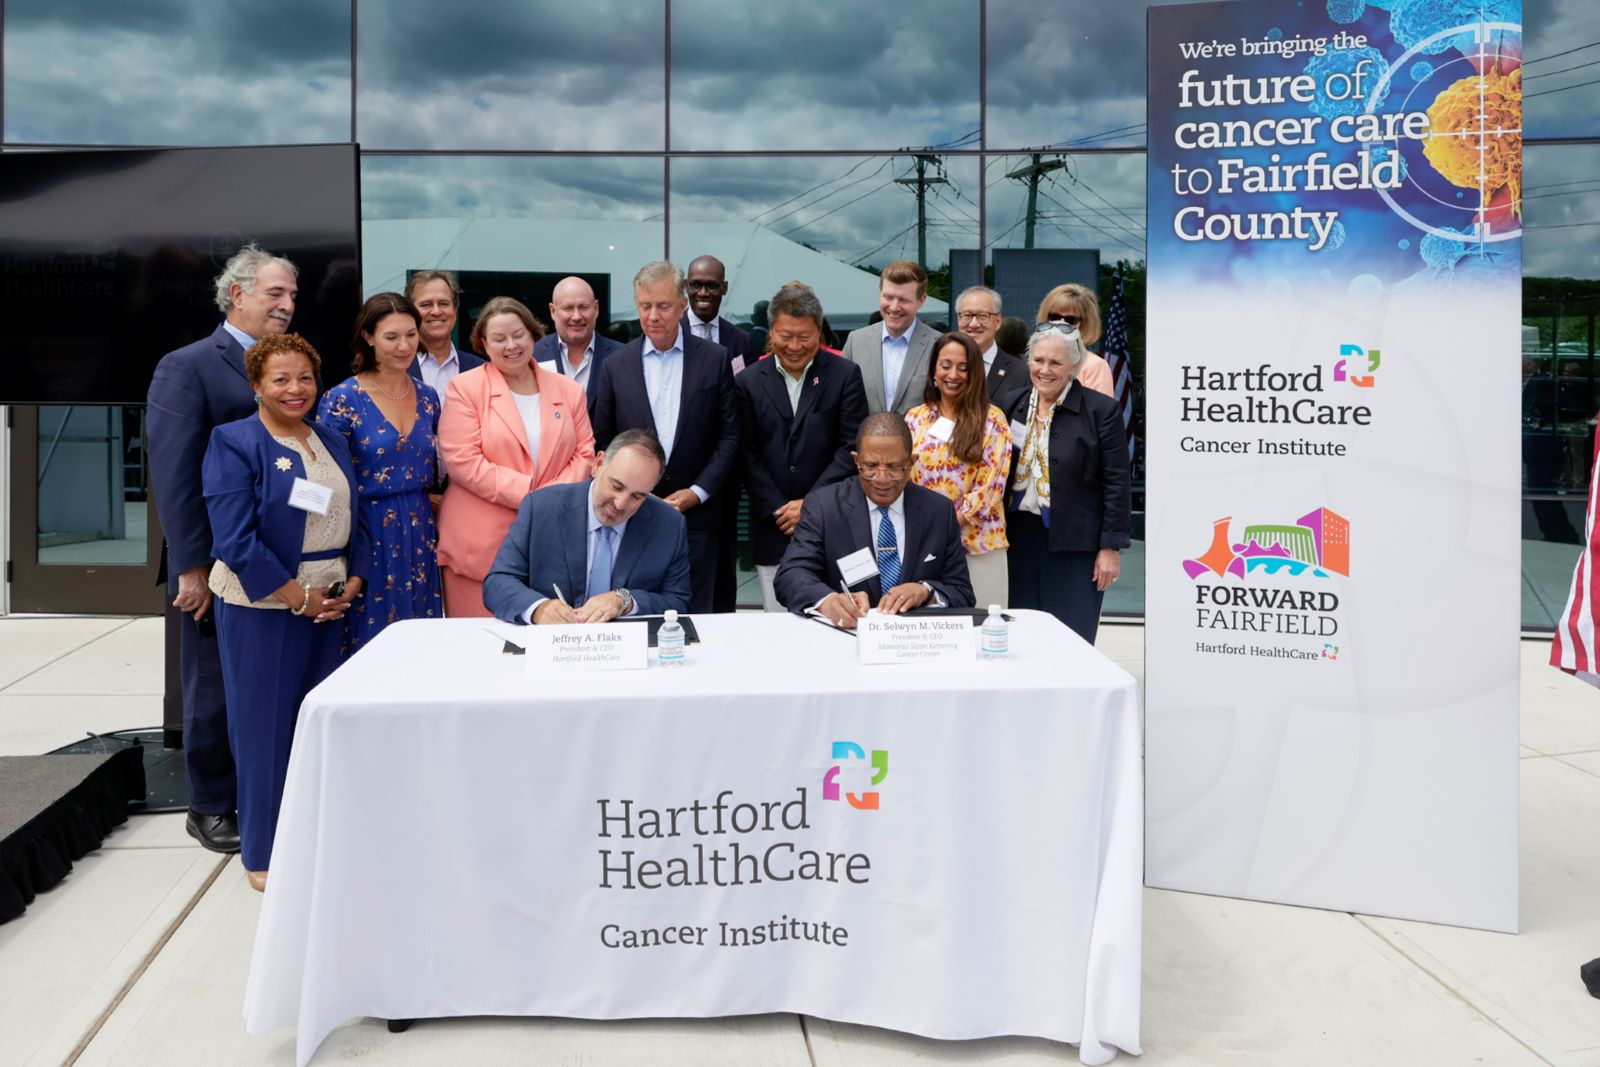 HHC and Memorial Sloan Kettering Cancer Center expand partnership to advance cancer care